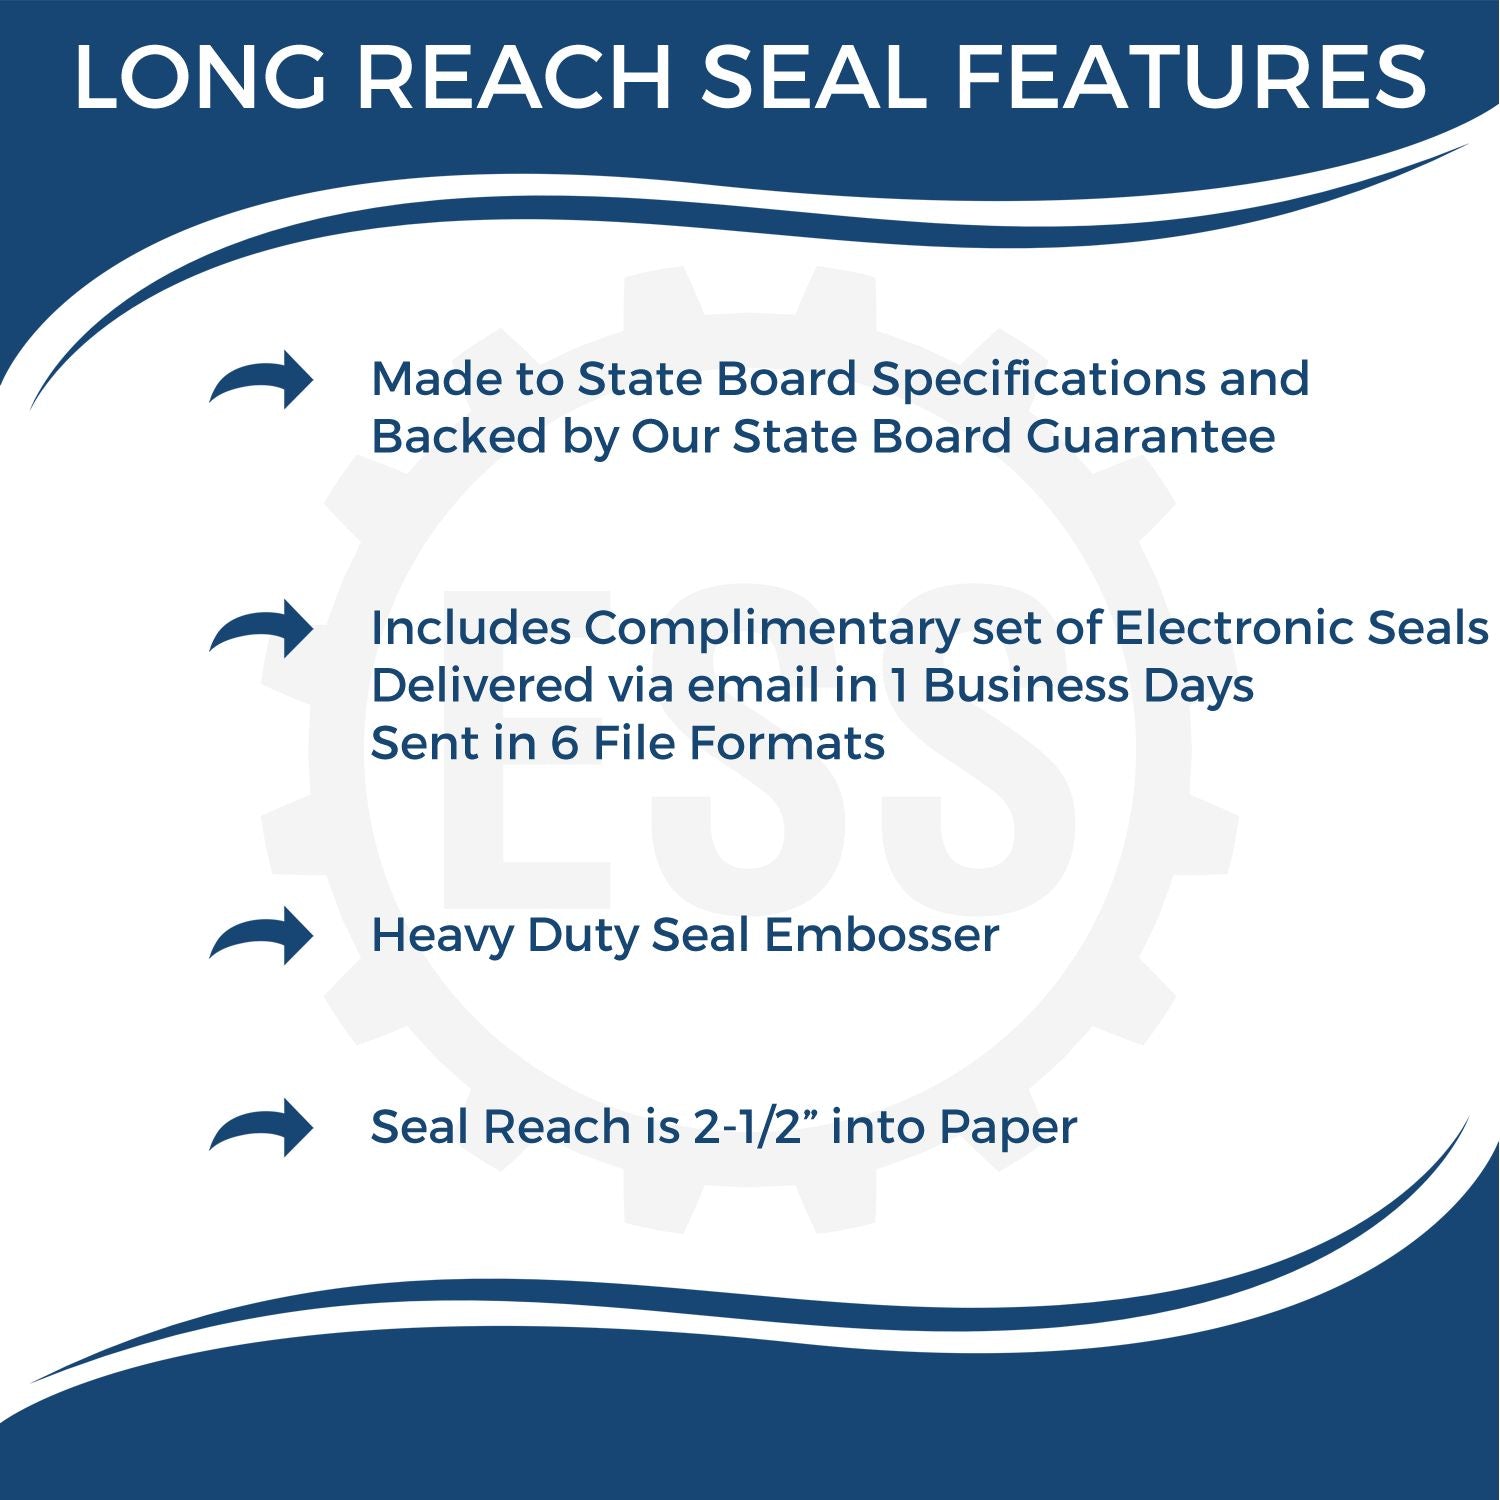 The main image for the Long Reach Nevada PE Seal depicting a sample of the imprint and electronic files